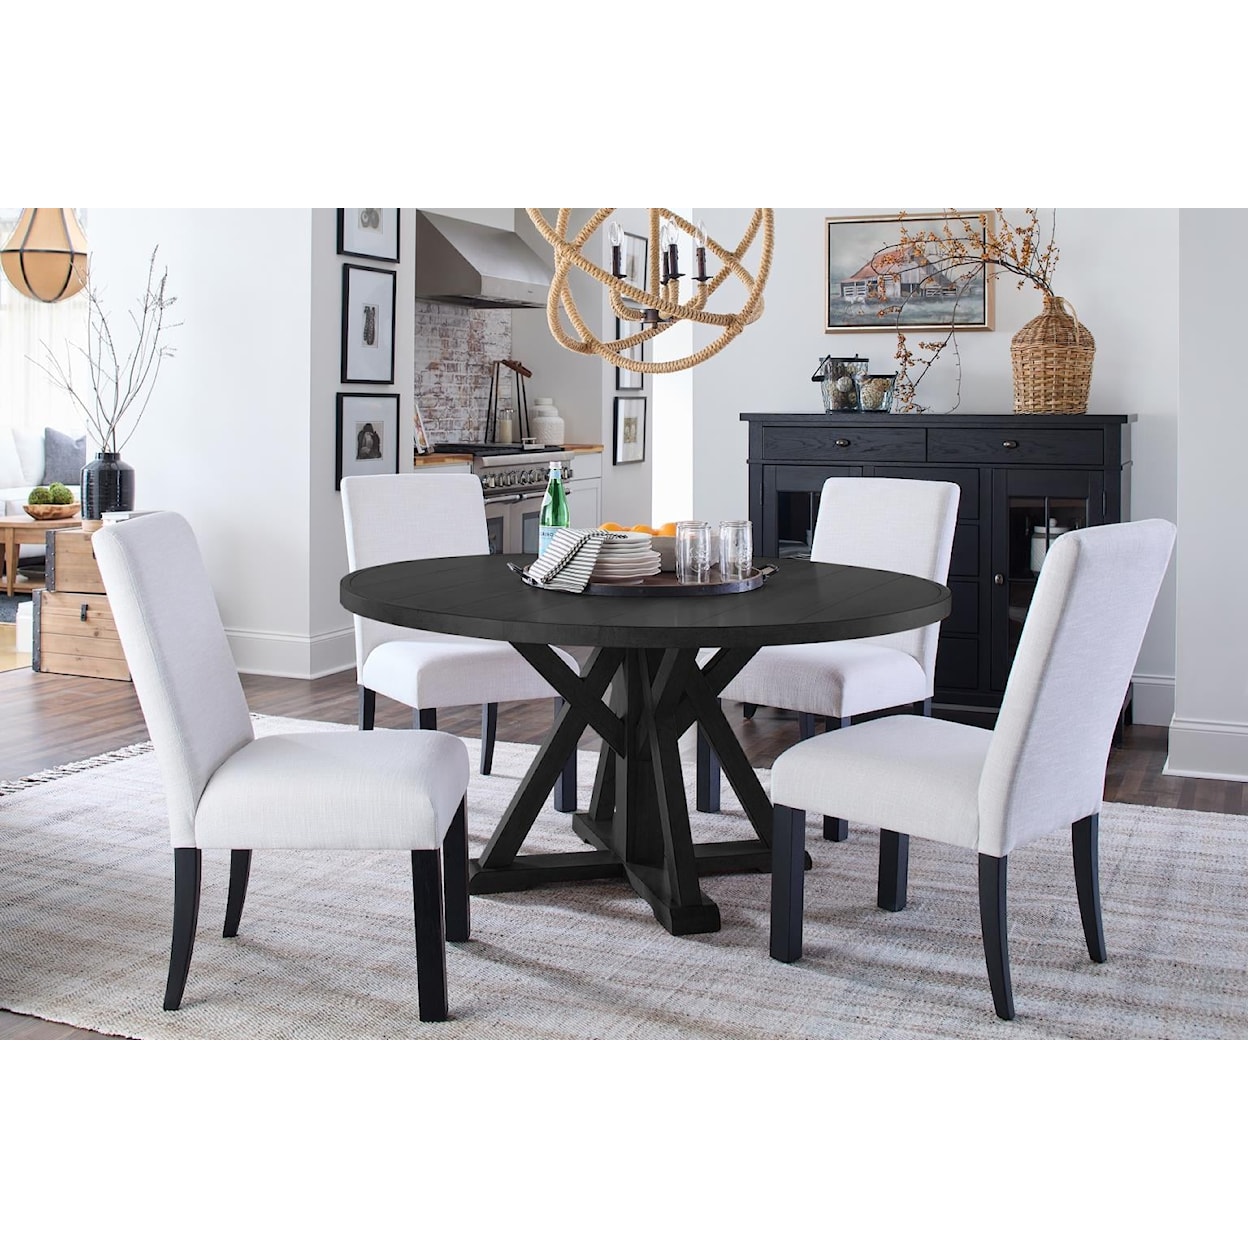 Trisha Yearwood Home Collection by Legacy Classic Today's Traditions Pedestal Dining Table